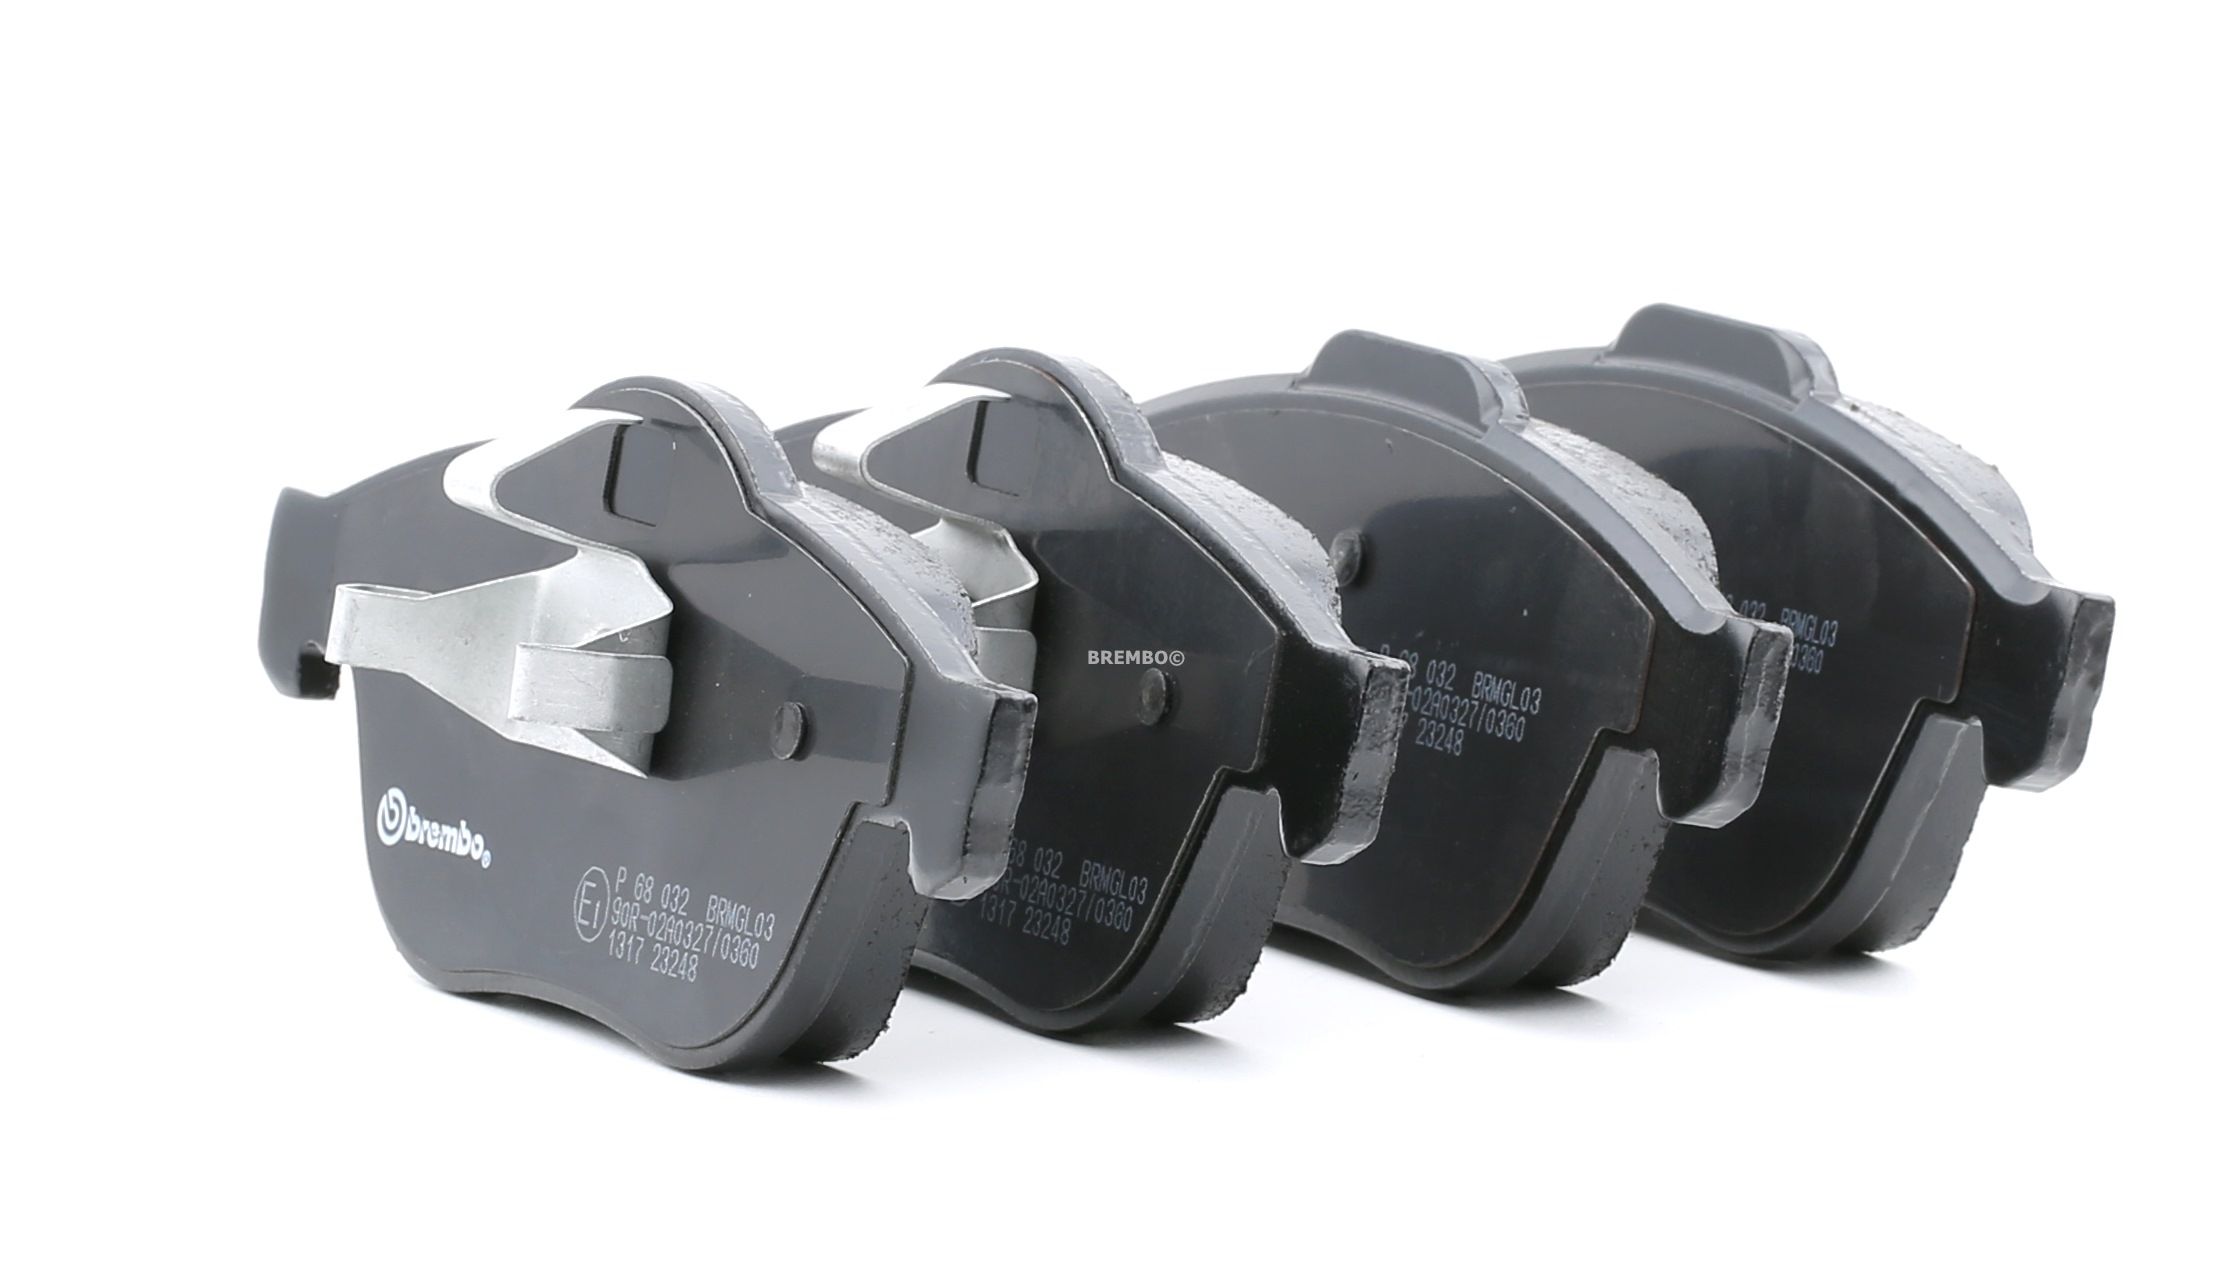 BREMBO P 68 032 Brake pad set excl. wear warning contact, with piston clip, with accessories